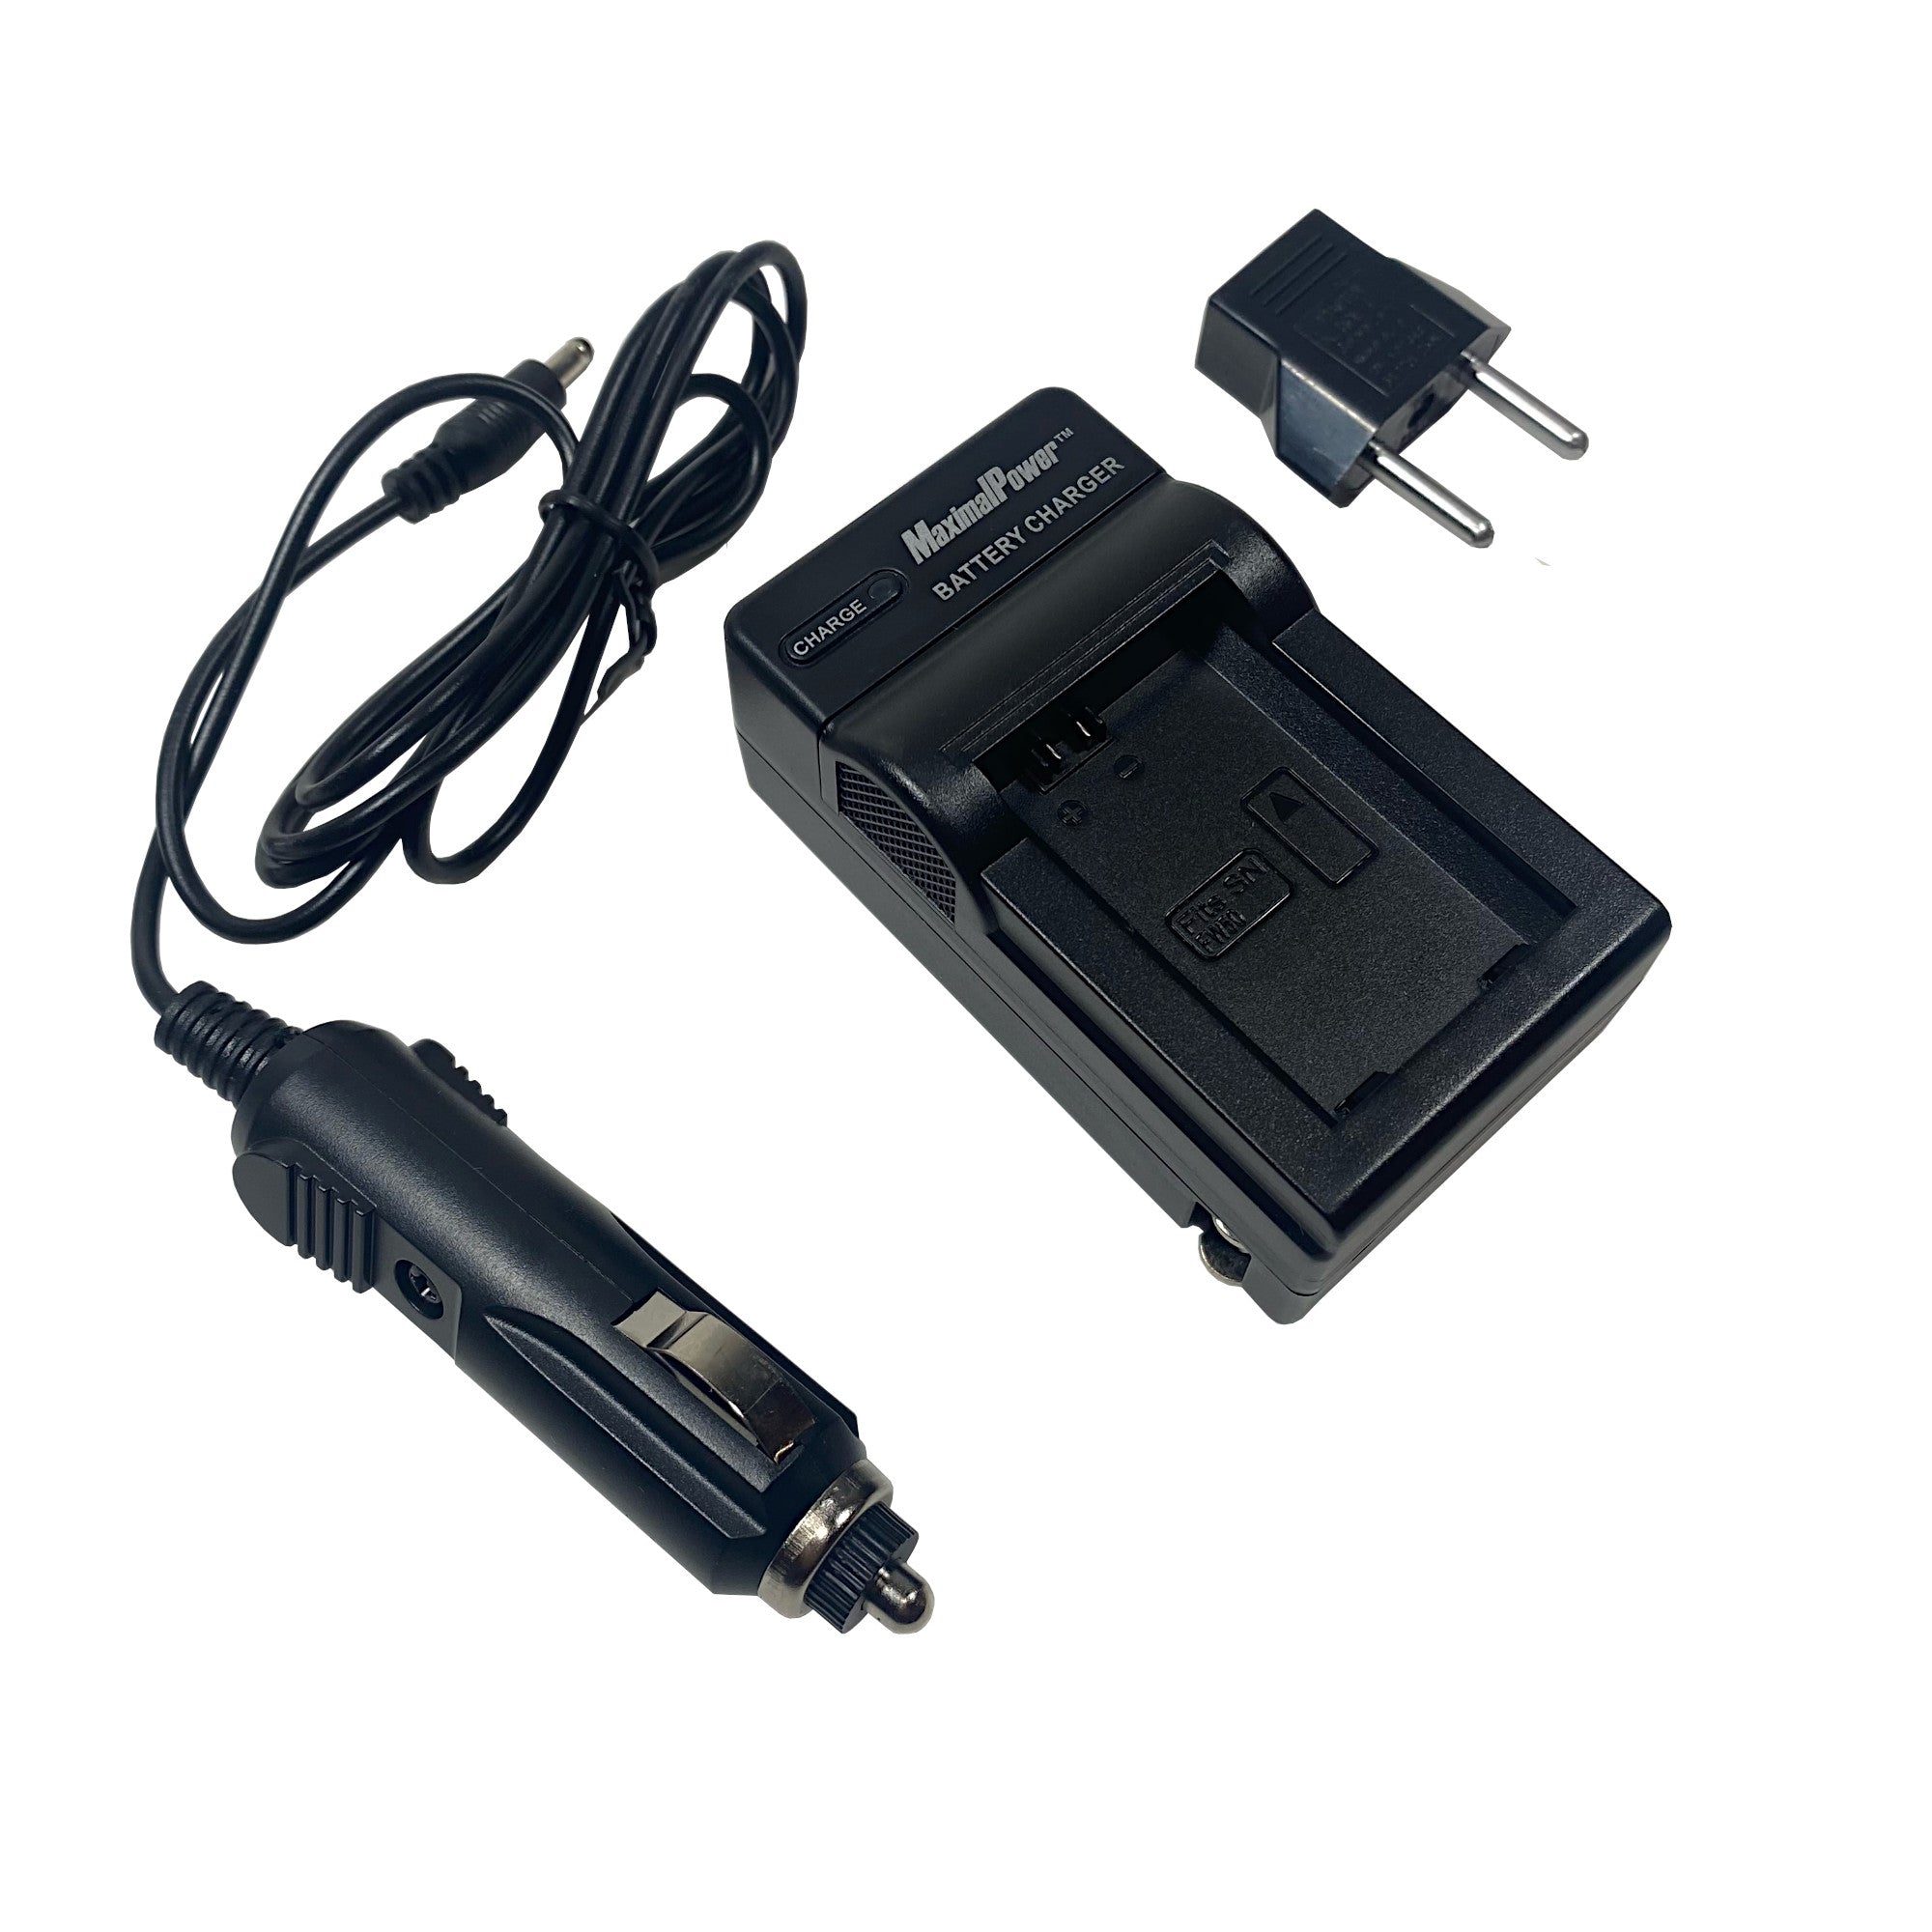 MaximalPower FW50 NP-FW50 Battery Charger, Compatible with Sony Alpha